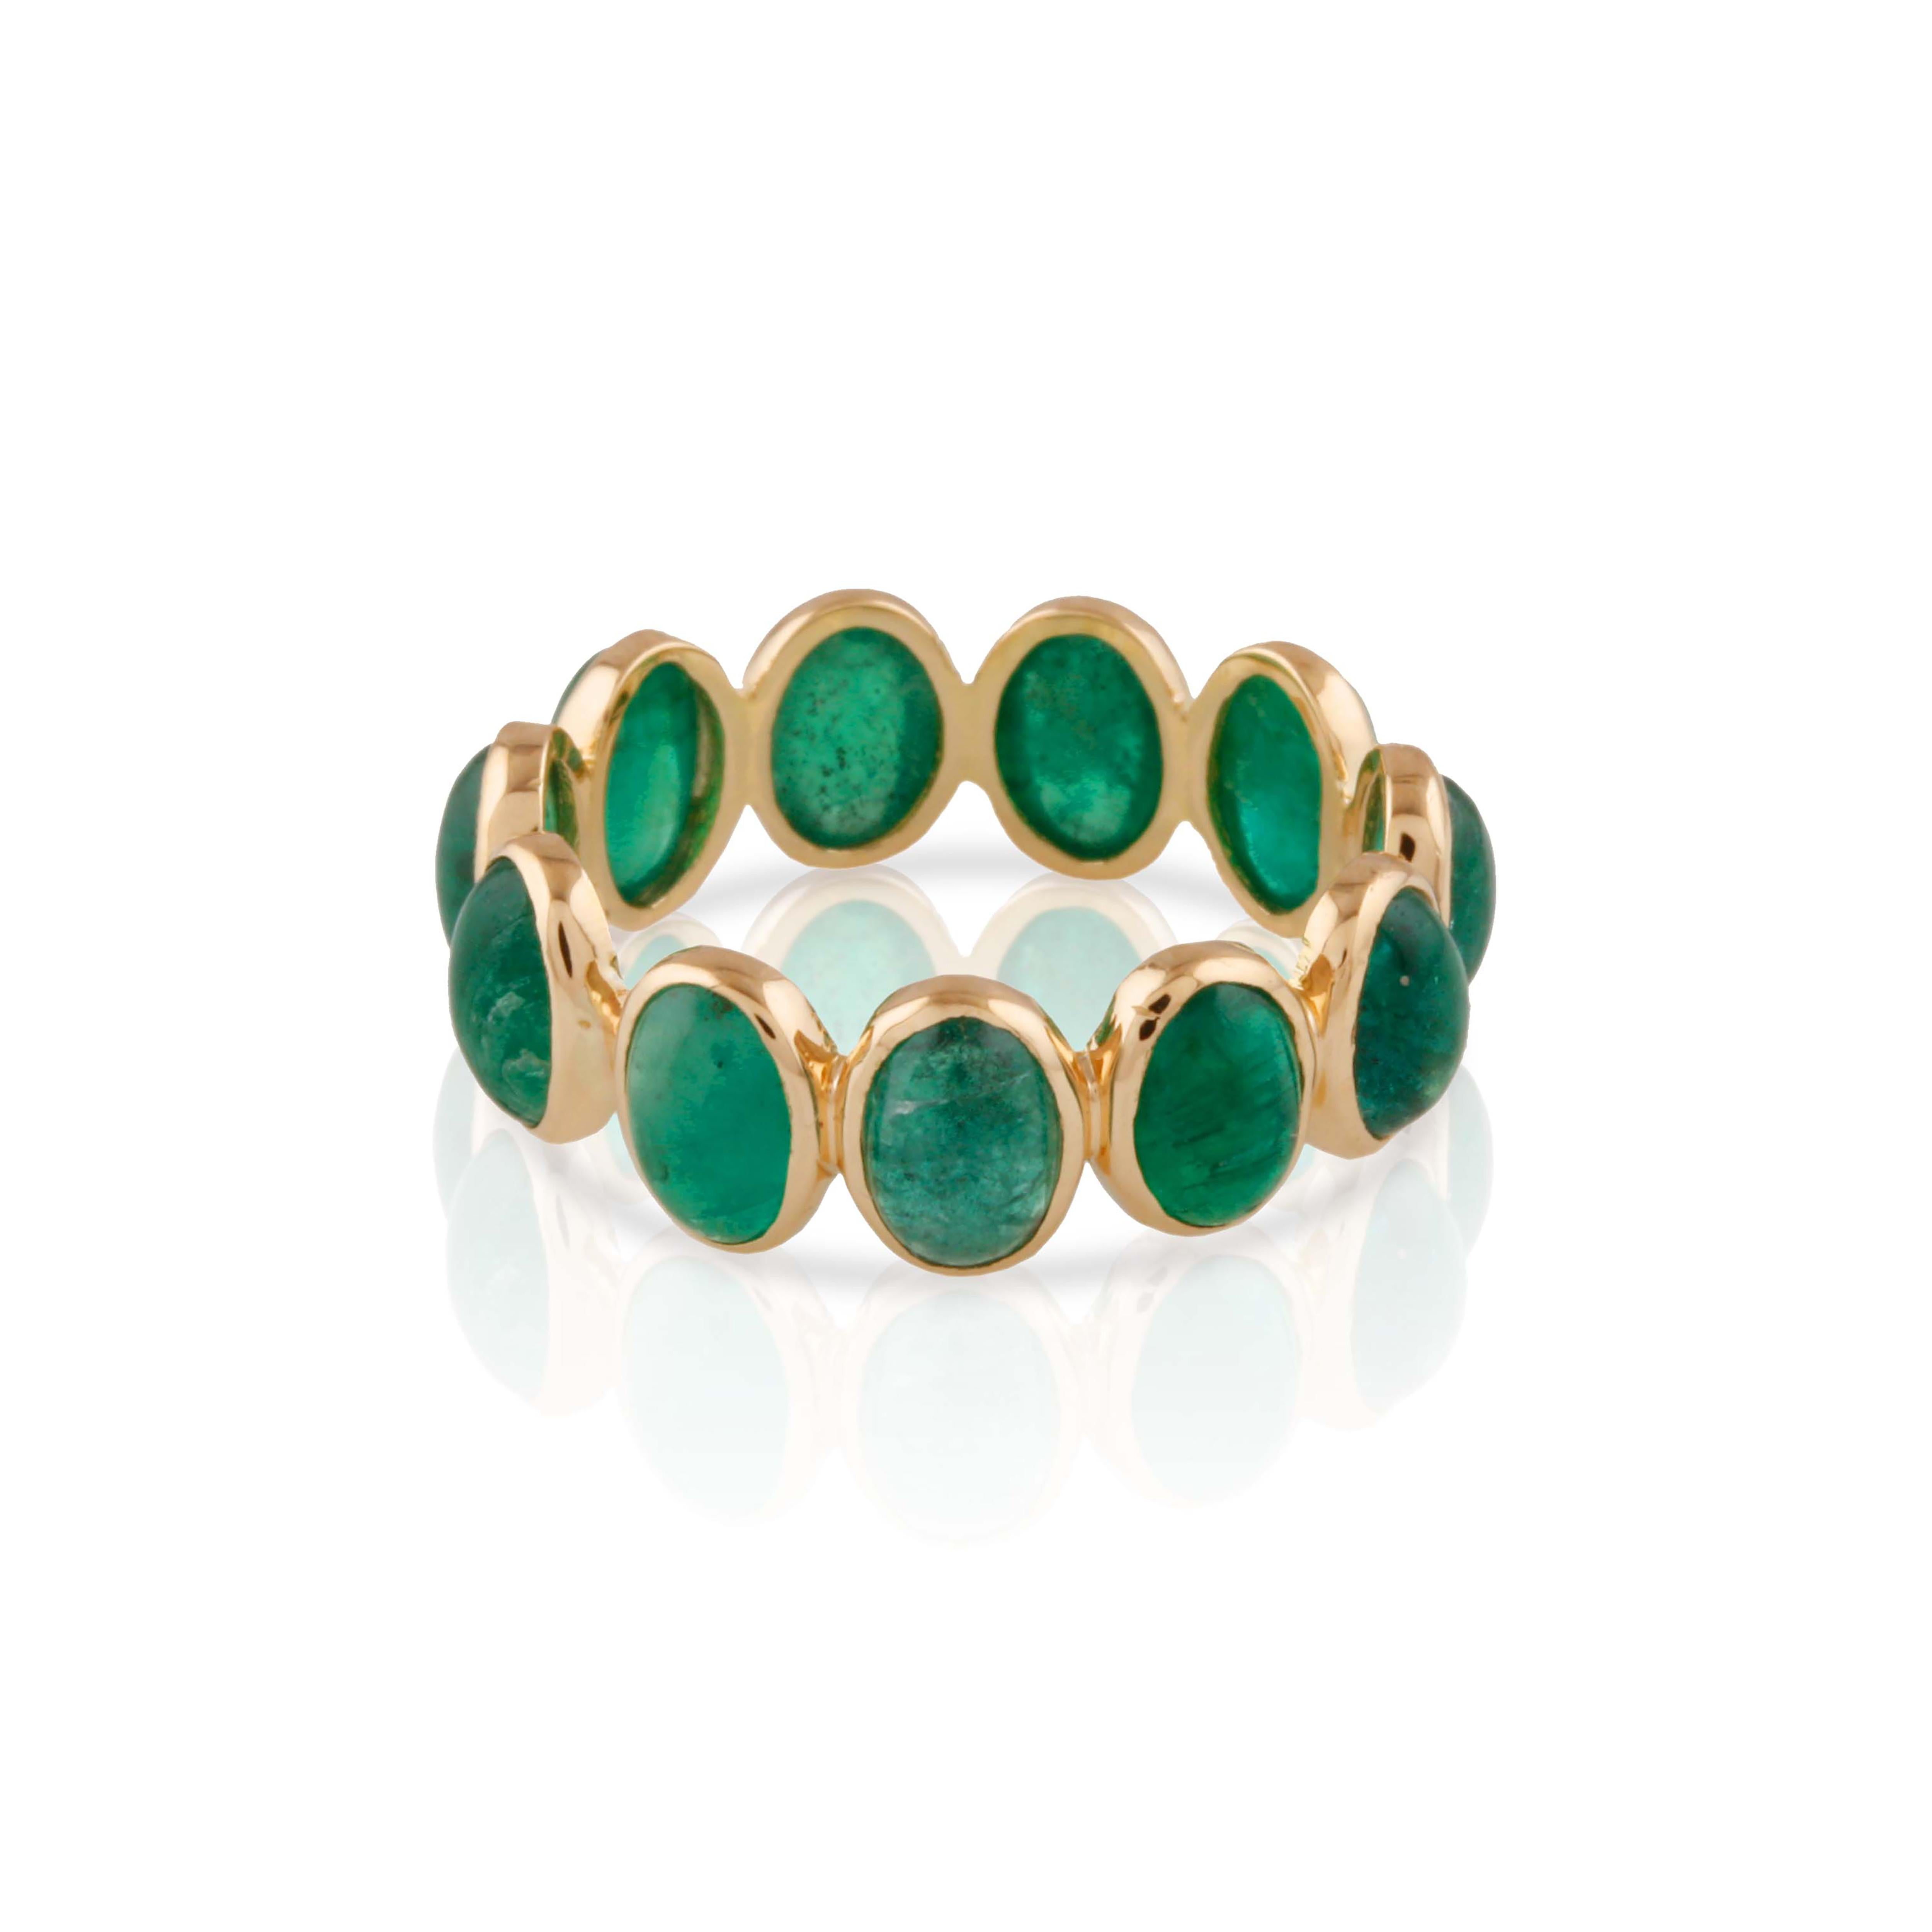 Tresor Beautiful Ring feature 5.62 carats of Emerald. The Ring are an ode to the luxurious yet classic beauty with sparkly gemstones and feminine hues. Their contemporary and modern design make them perfect and versatile to be worn at any occasion. 